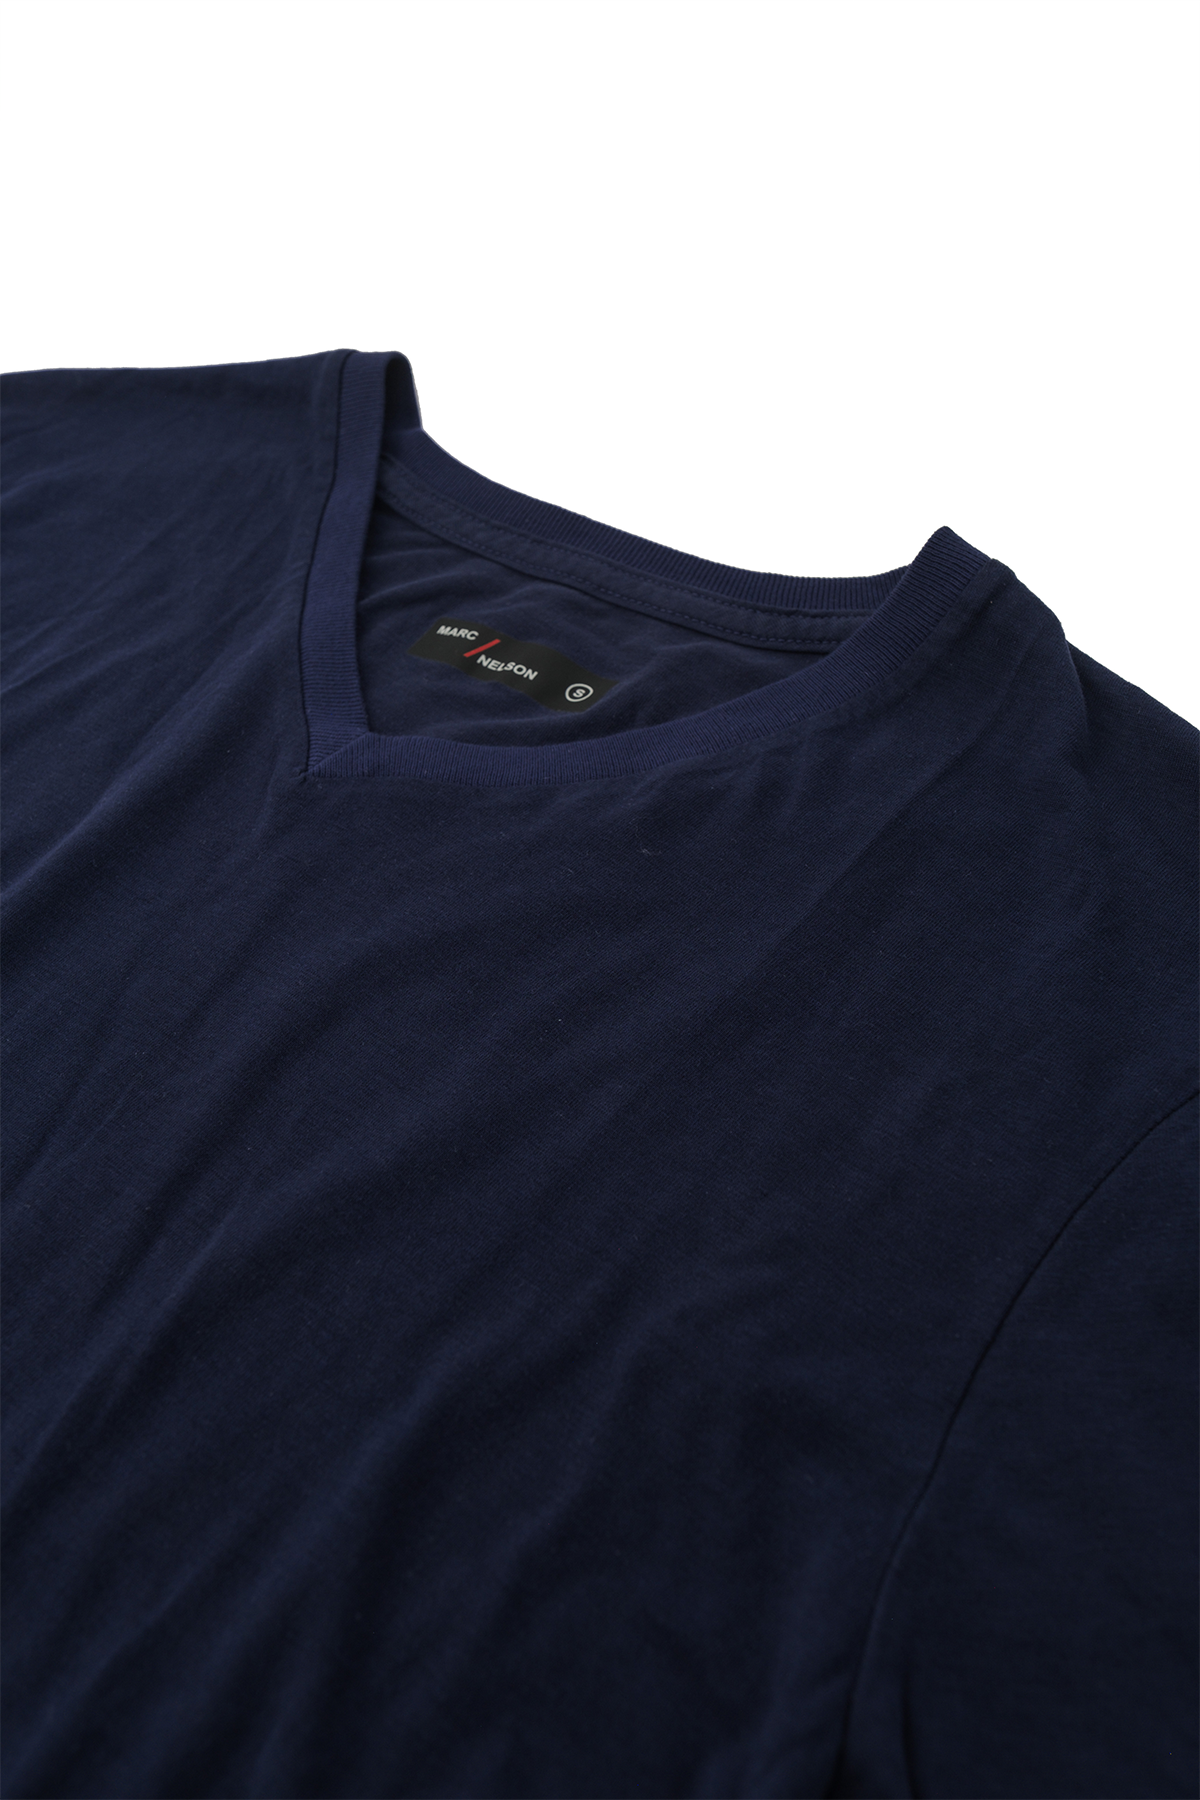 Close up of navy v-neck t-shirt laid flat on a white background.